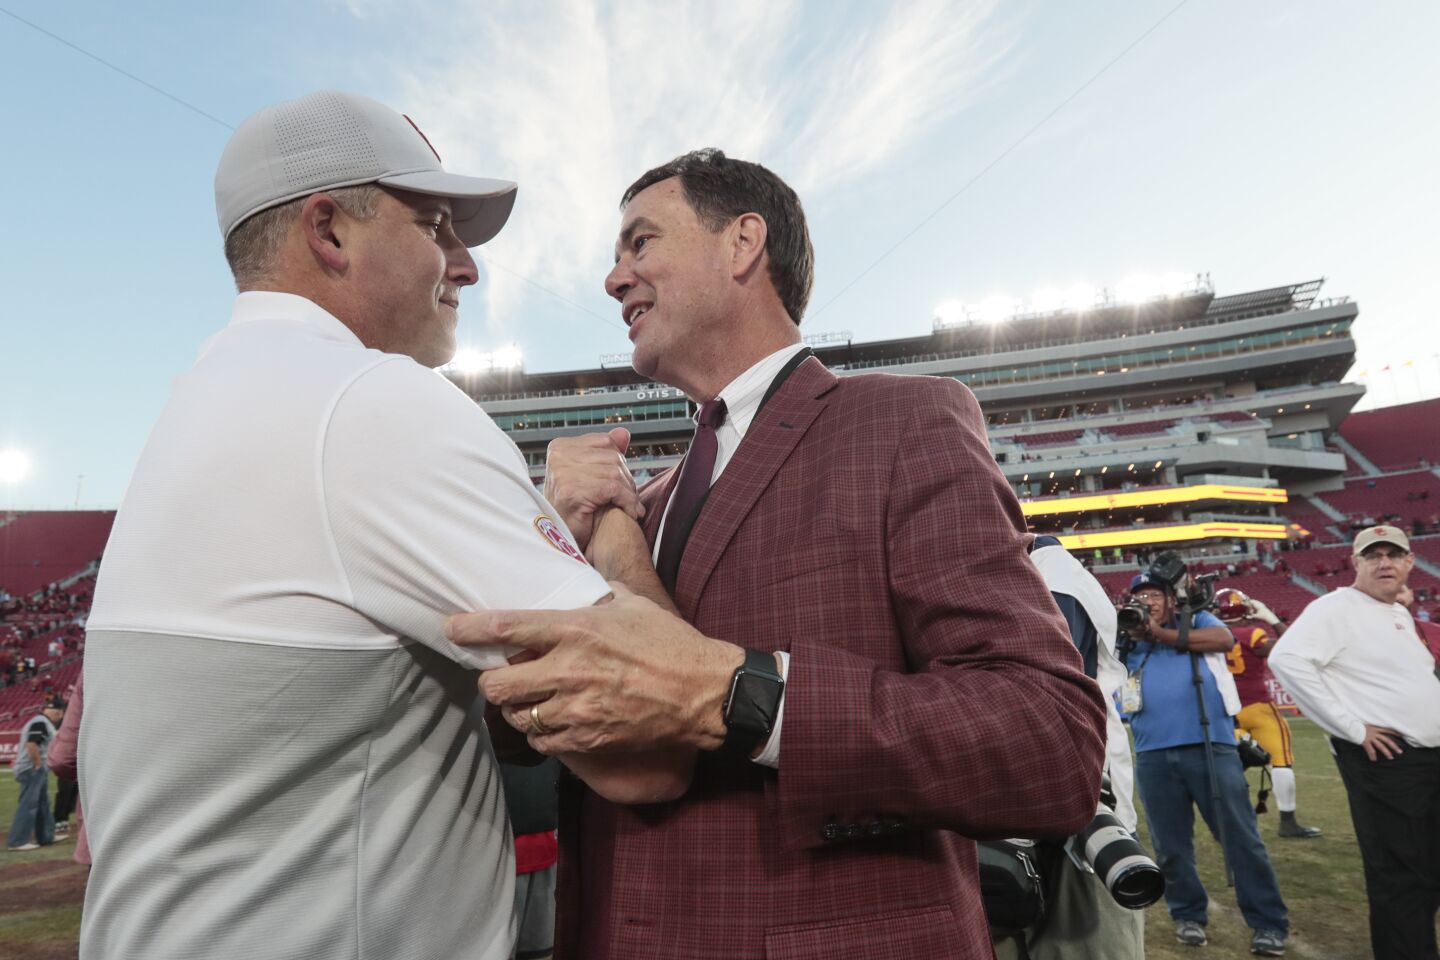 USC head coach Clay Helton is congratulated by Athletic Director Mike Bohn at midfield after a 52-35 win over UCLA at the Coliseum on Saturday.